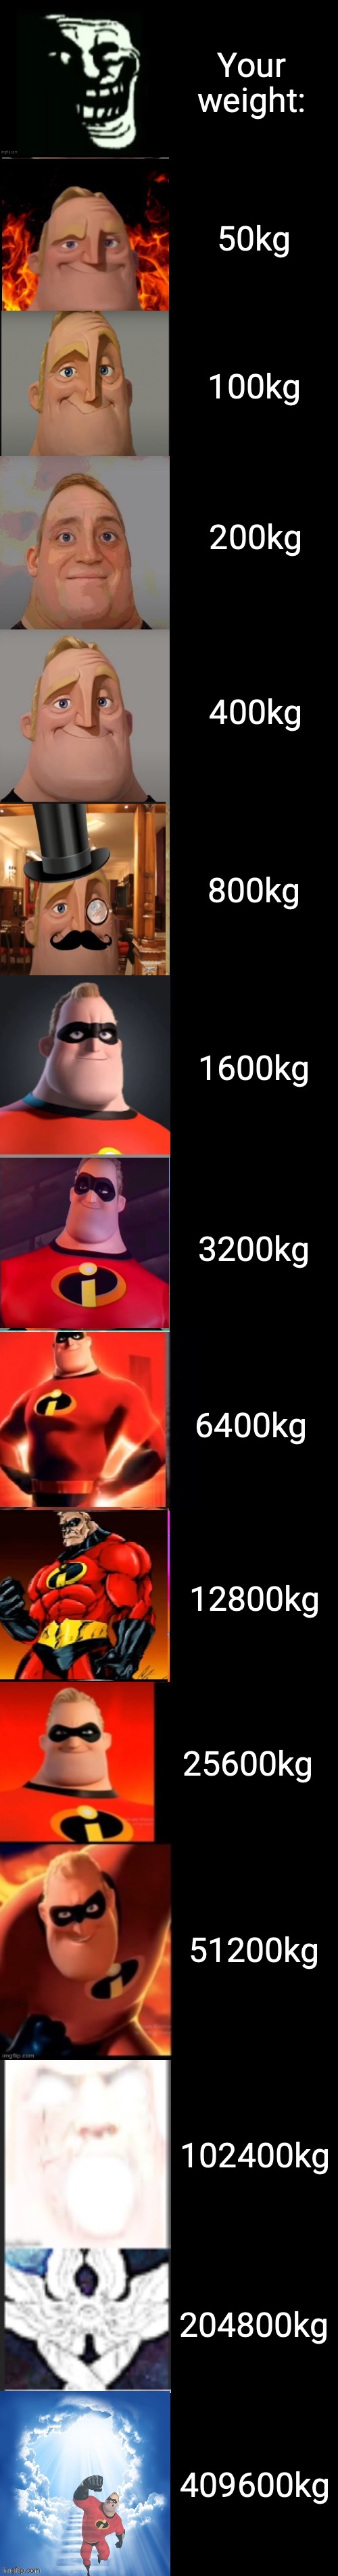 Mr incredible becoming Powerful(Strong 2nd version)/Hero | Your weight:; 50kg; 100kg; 200kg; 400kg; 800kg; 1600kg; 3200kg; 6400kg; 12800kg; 25600kg; 51200kg; 102400kg; 204800kg; 409600kg | image tagged in mr incredible becoming powerful strong 2nd version /hero,idk what to say | made w/ Imgflip meme maker